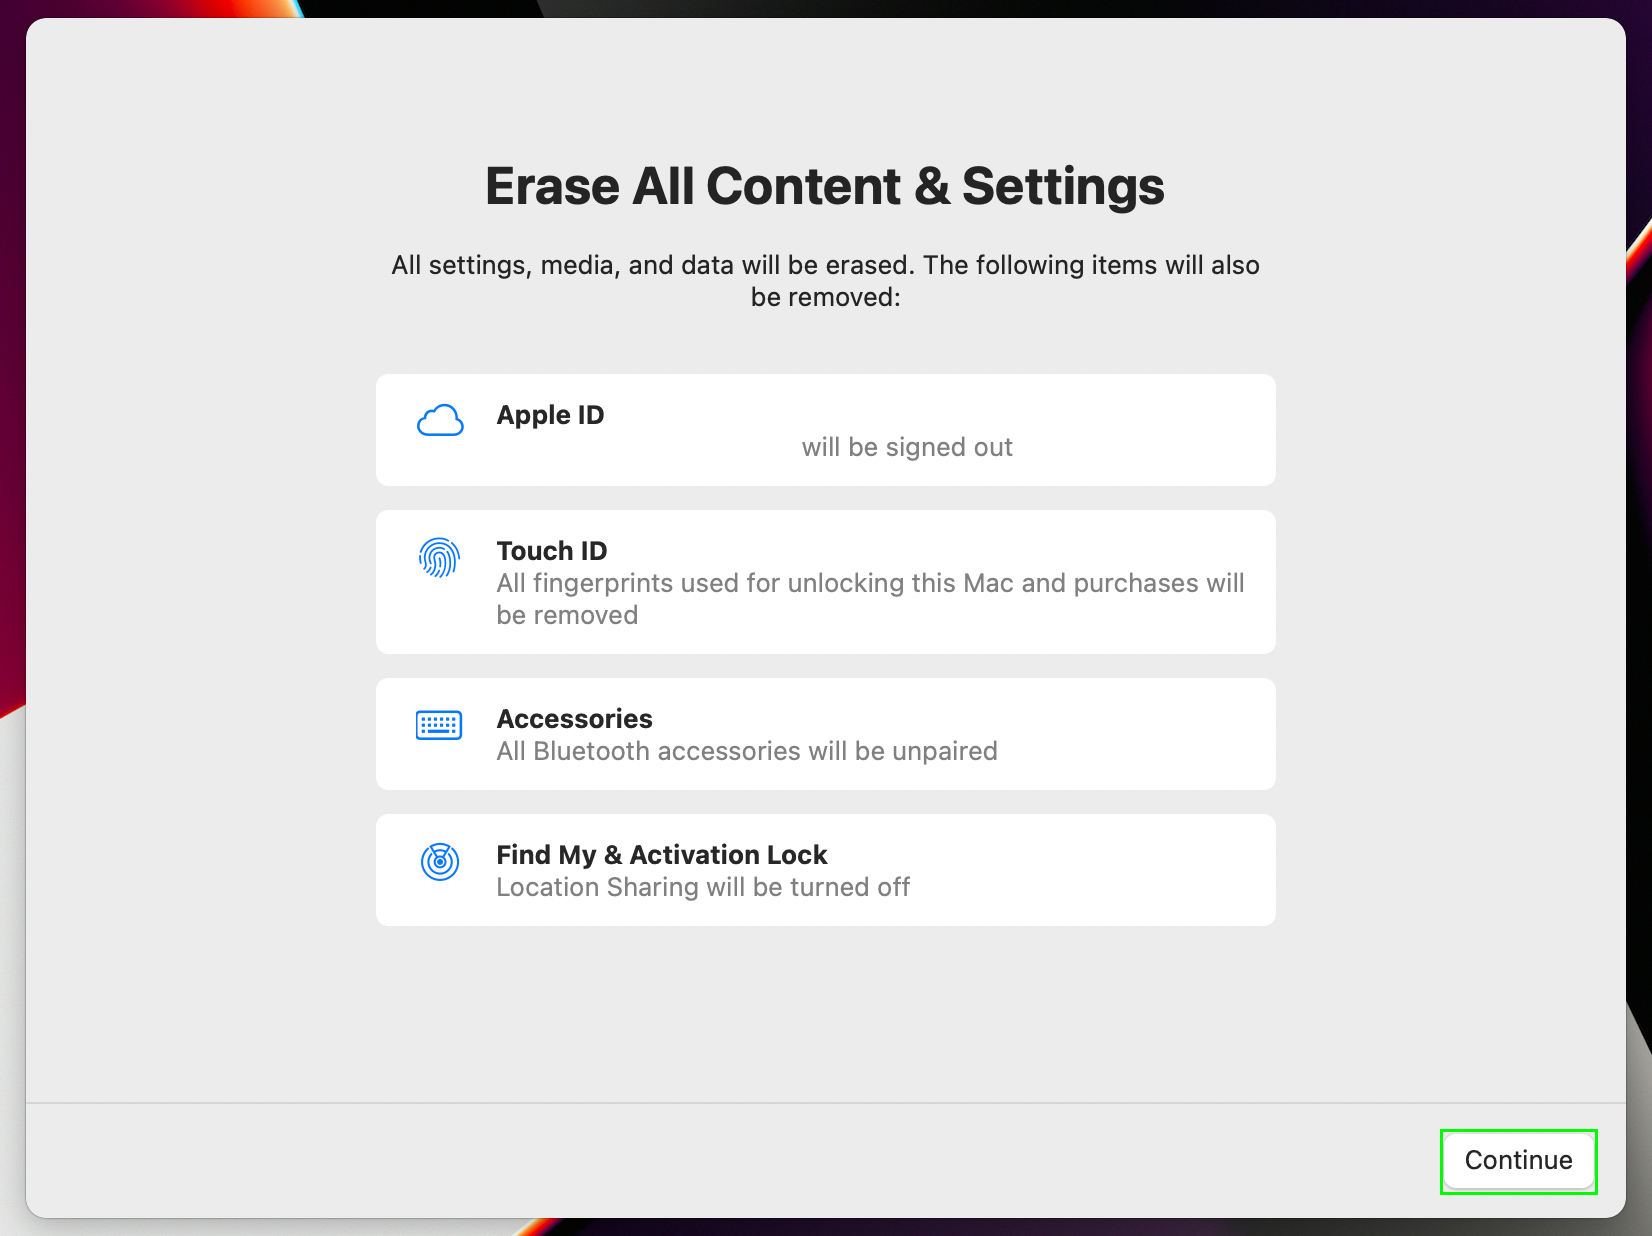 macOS Erase All Content & Settings window